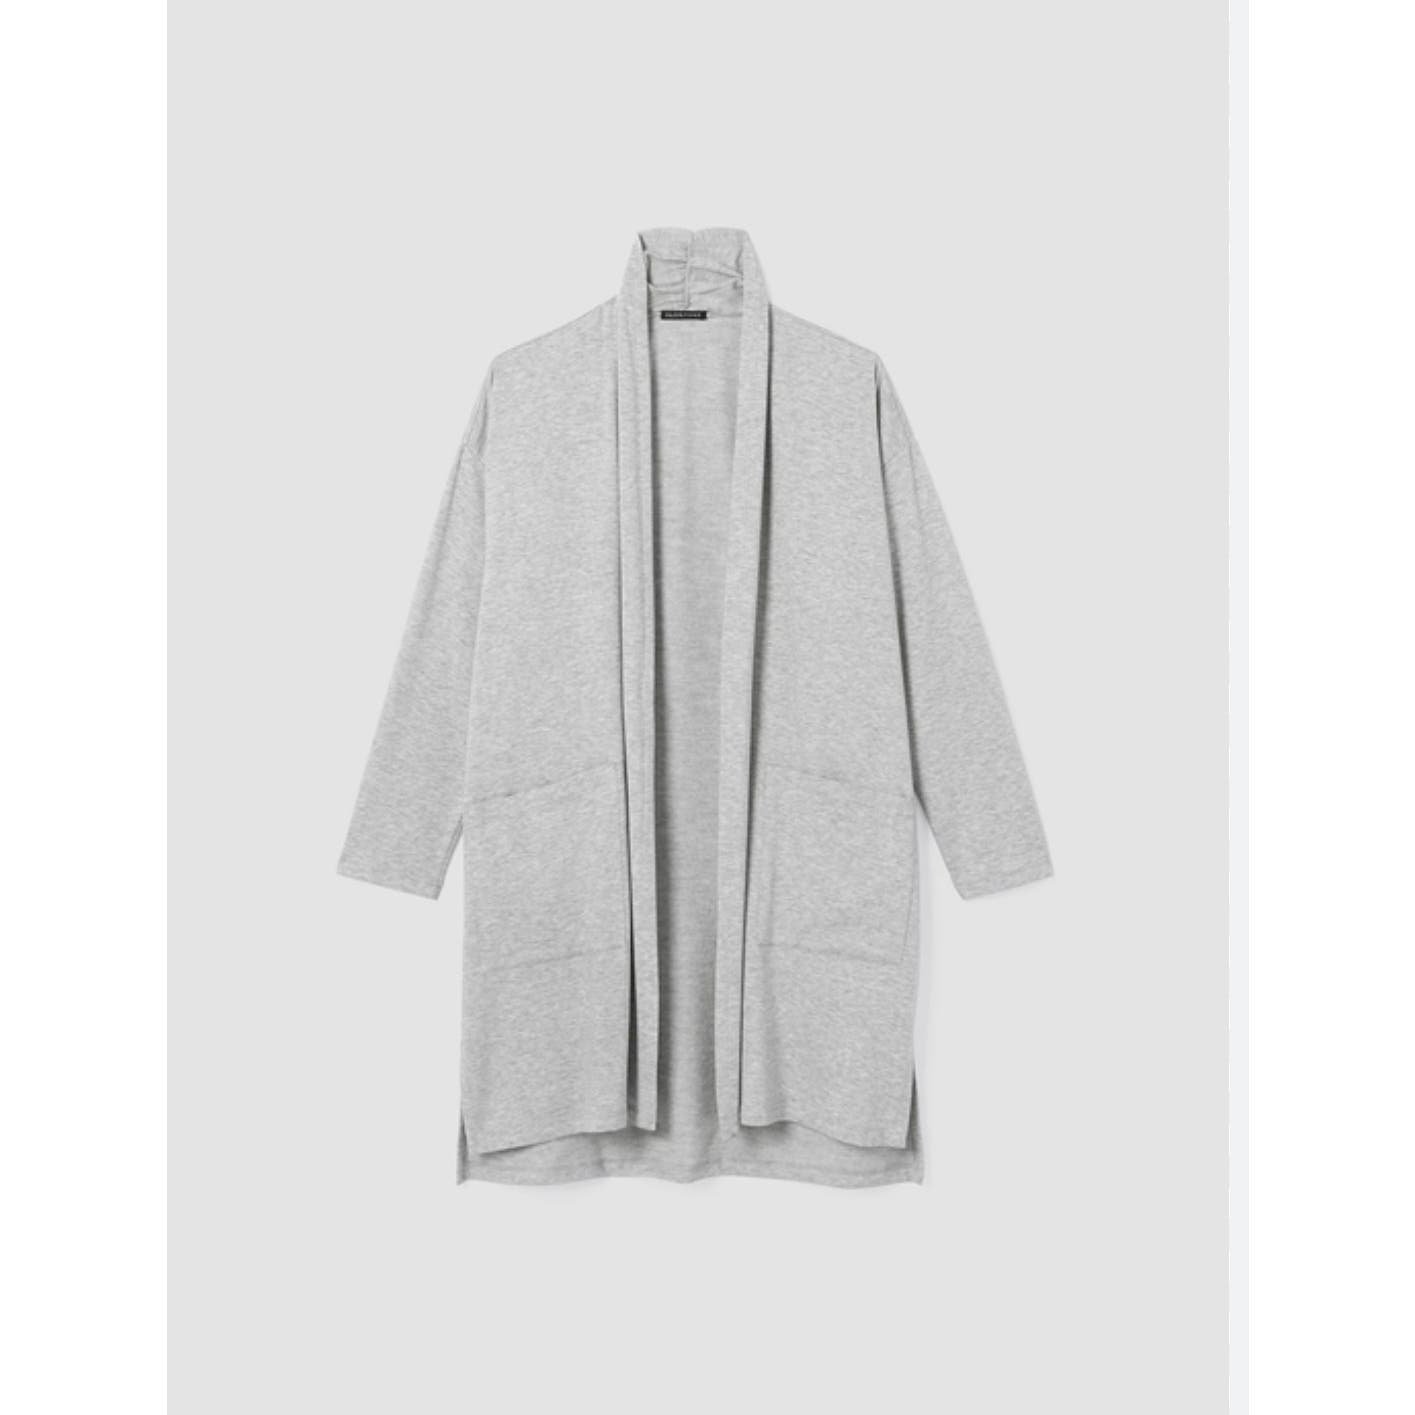 Latest  Eileen Fisher Cozy Brushed Terry Jacket/Sweater